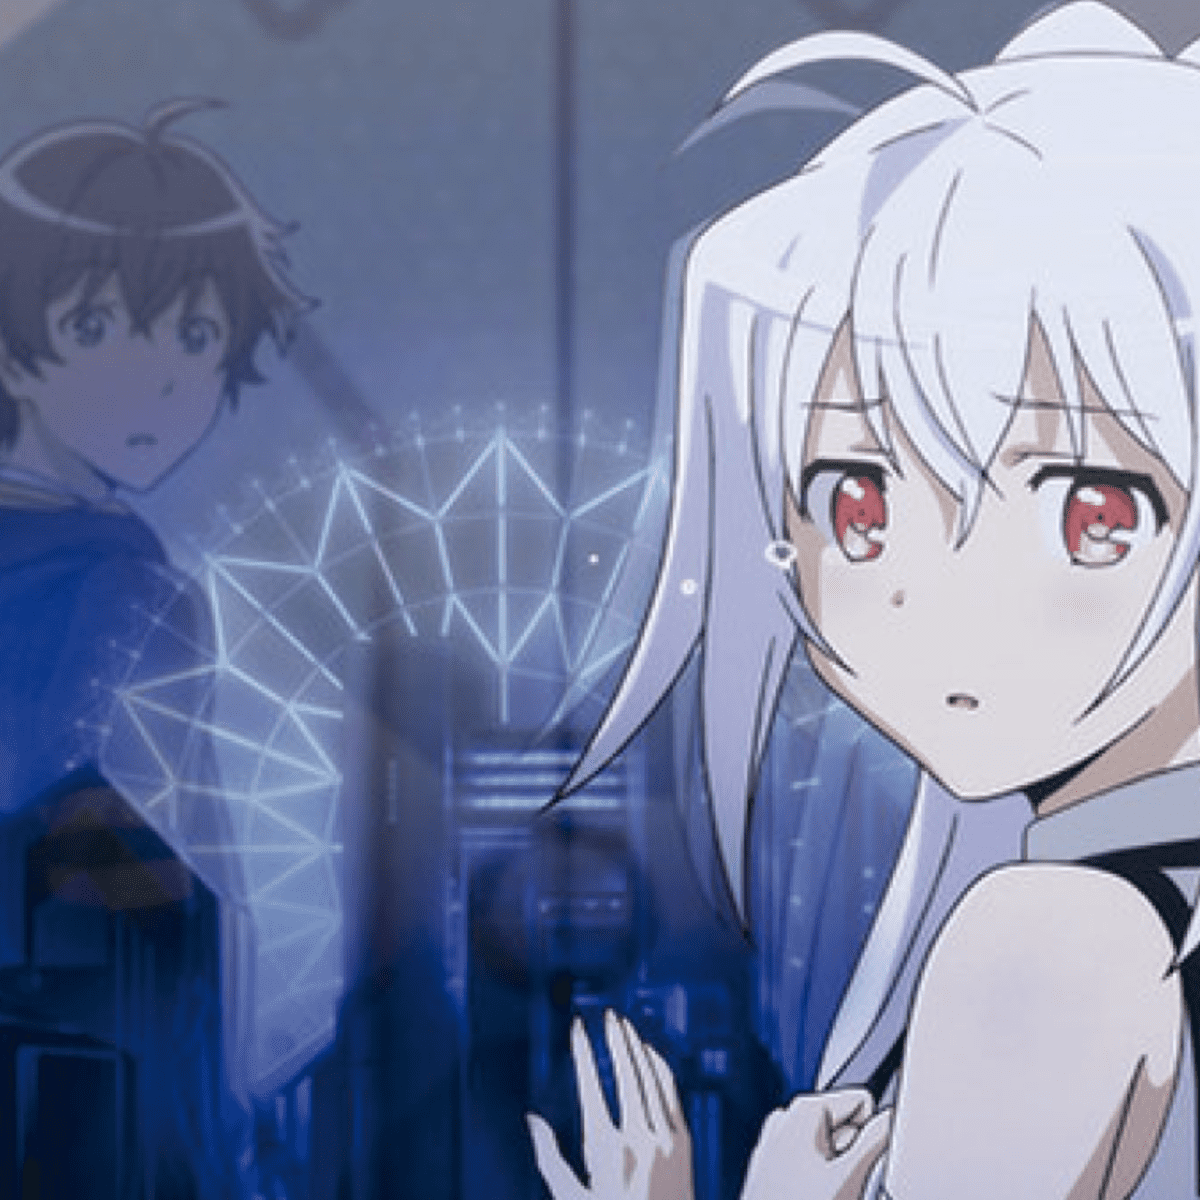 Anime Review #111: Plastic Memories – The Traditional Catholic Weeb